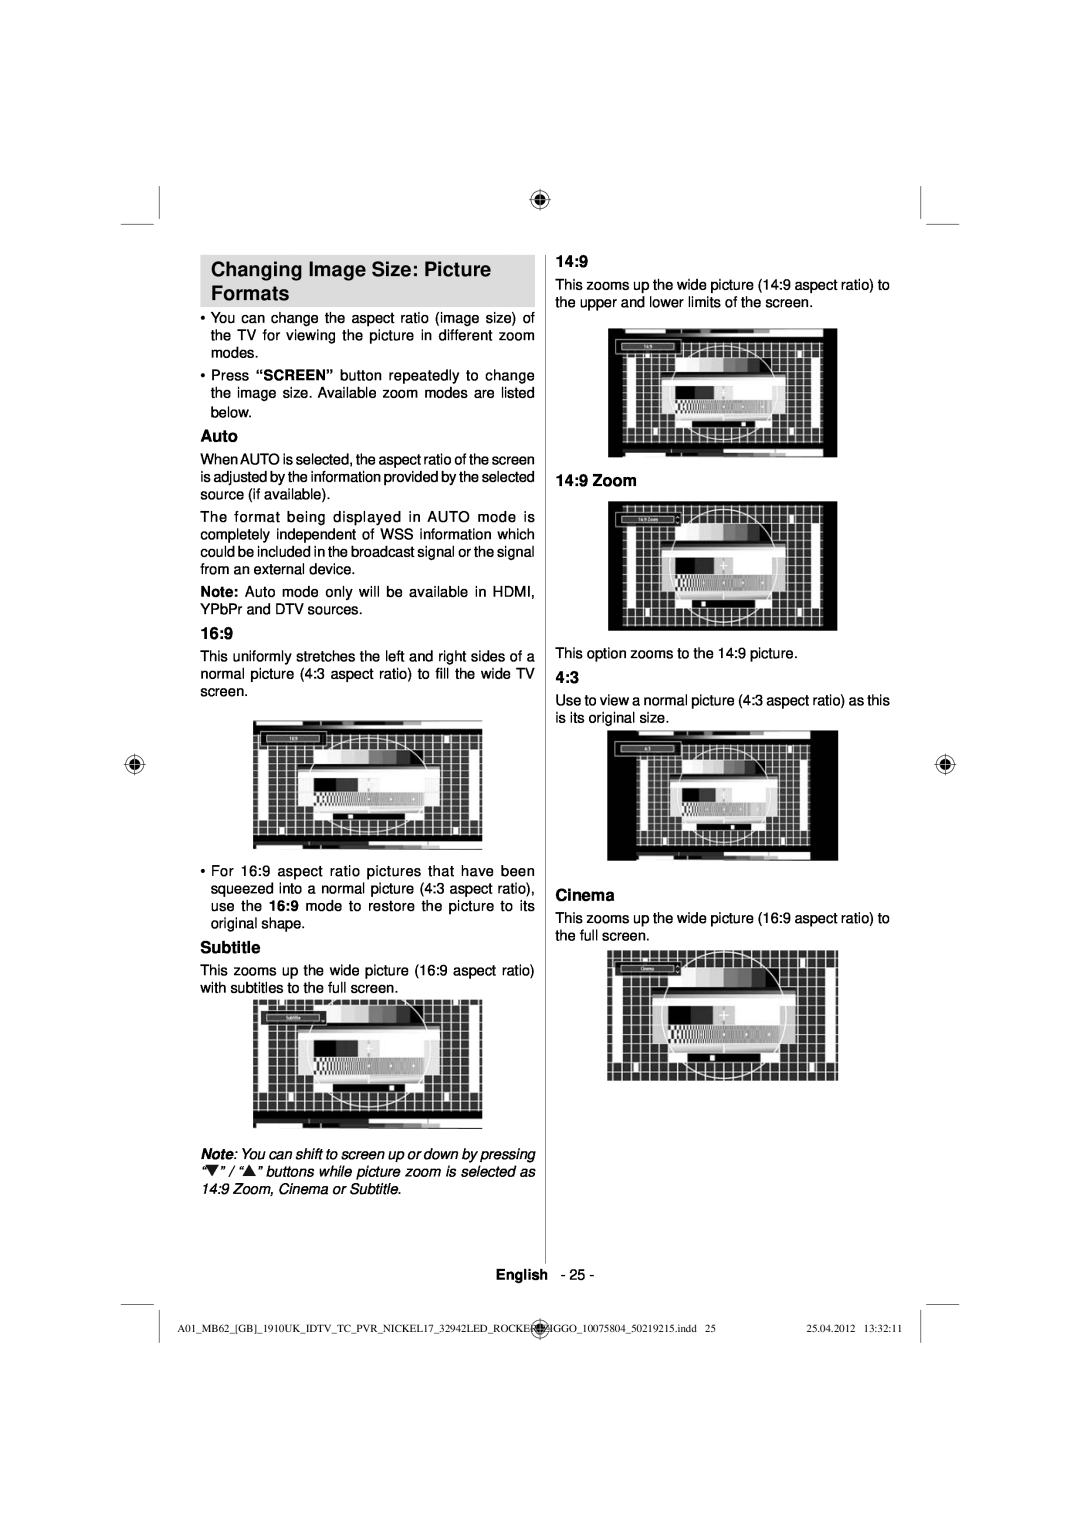 Sharp LC-32LE240E operation manual Changing Image Size Picture Formats, Auto, Subtitle, Zoom, Cinema 